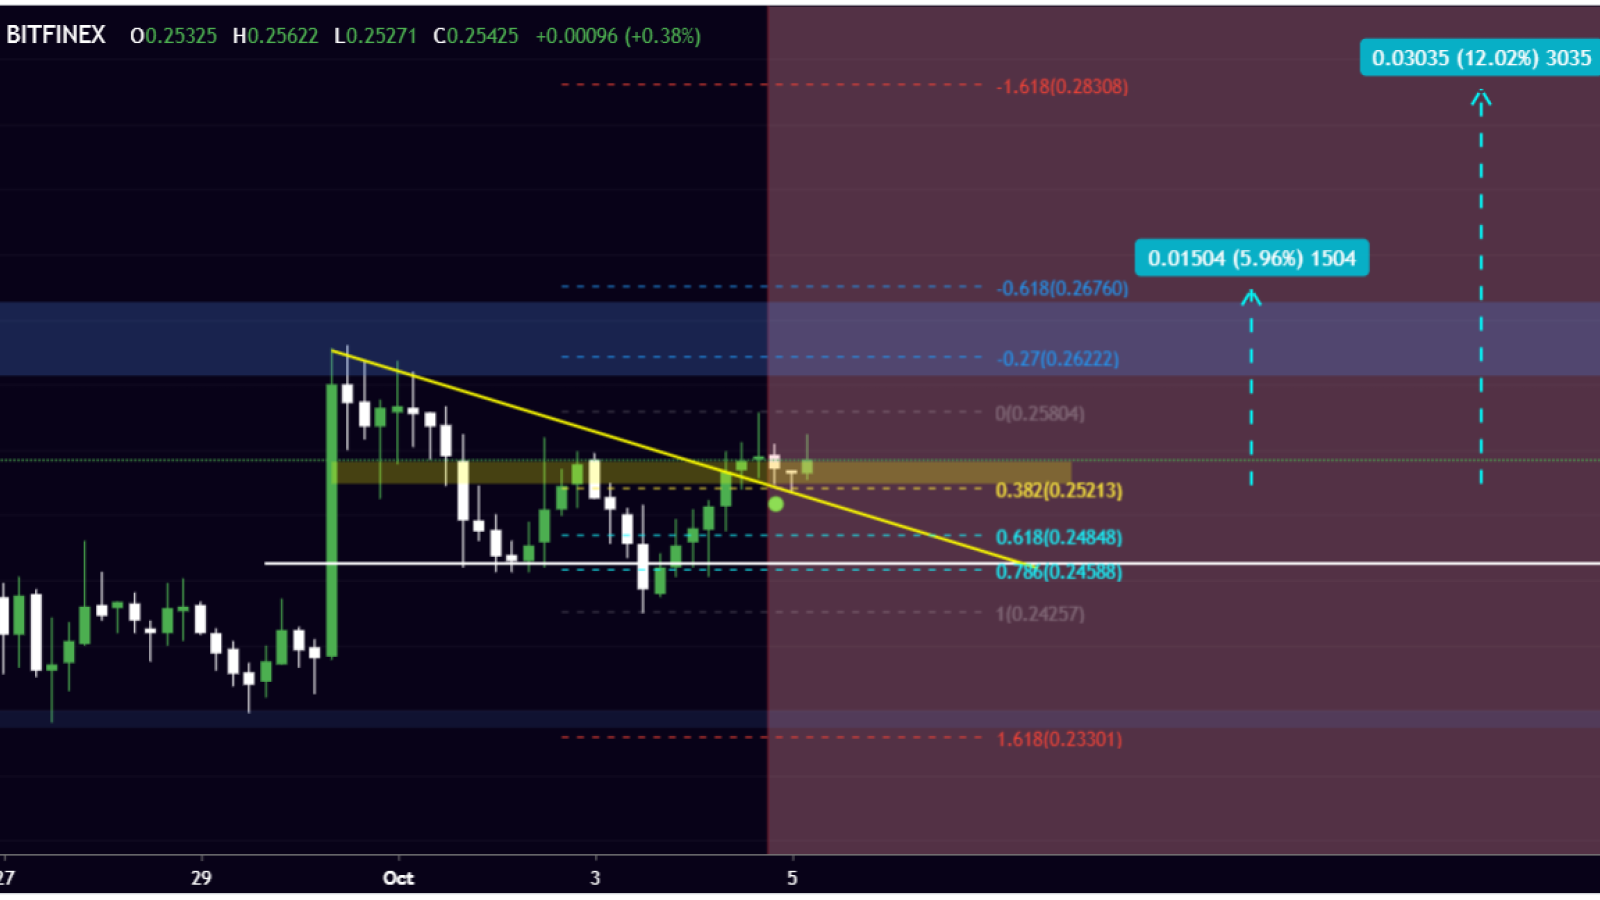 XRP is aiming to break the support levels